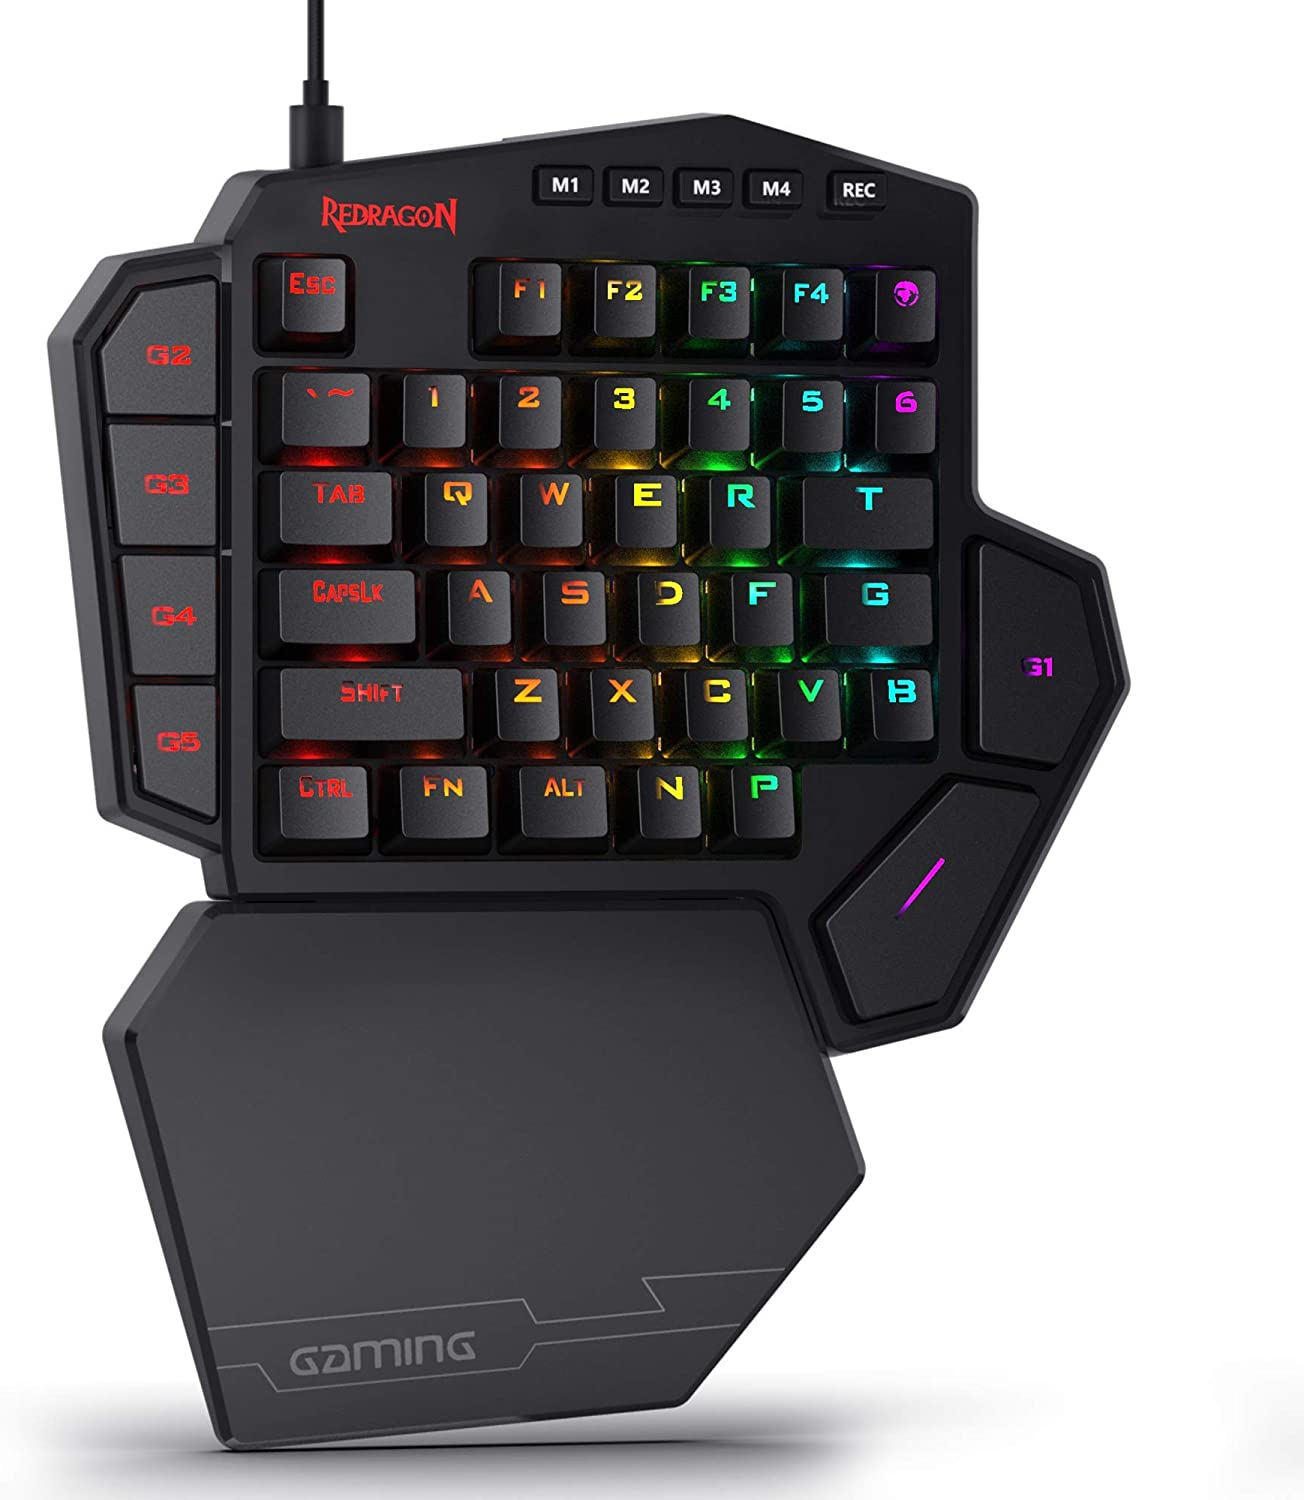 A one-handed gaming keyboard is suitable for gaming when using an iPad.